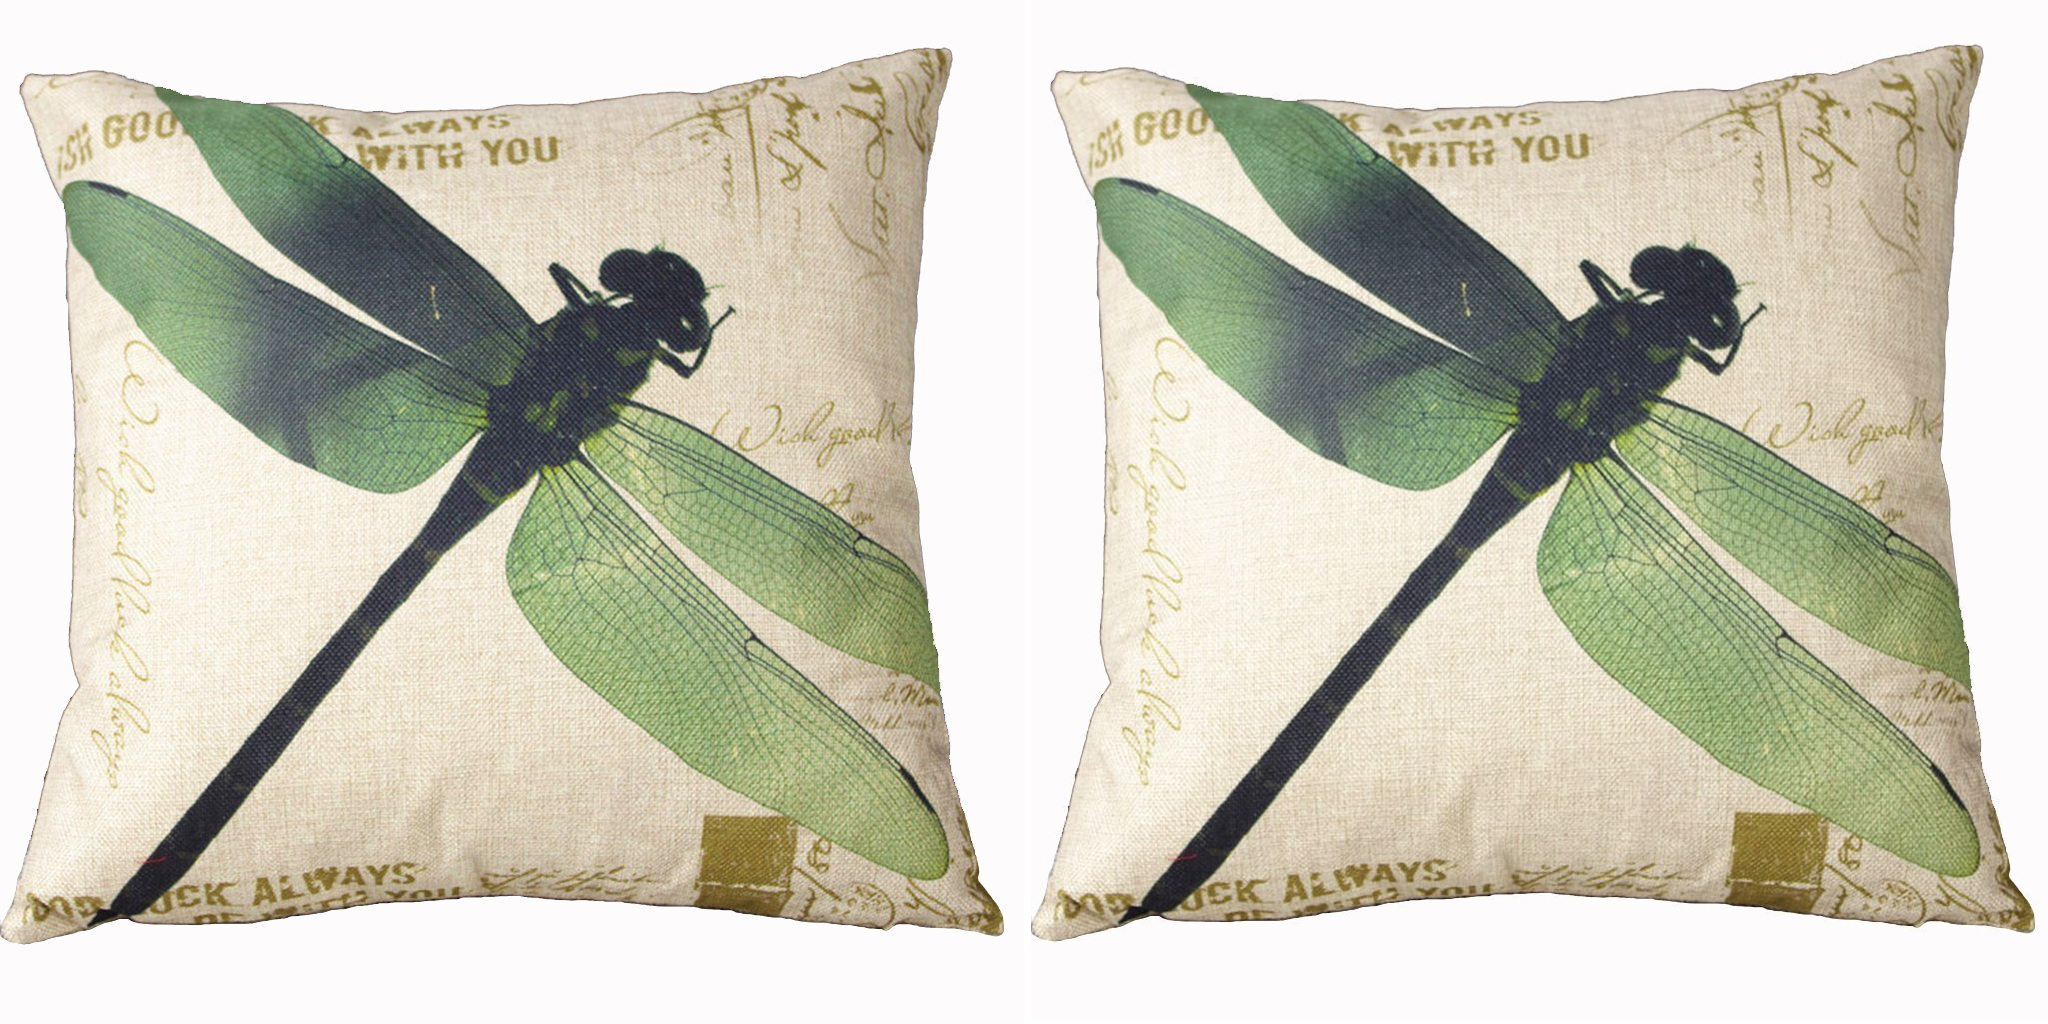 Indoor / Outdoor 18×18 Dragonfly Throw Pillow Cover Just $1.10 SHIPPED!